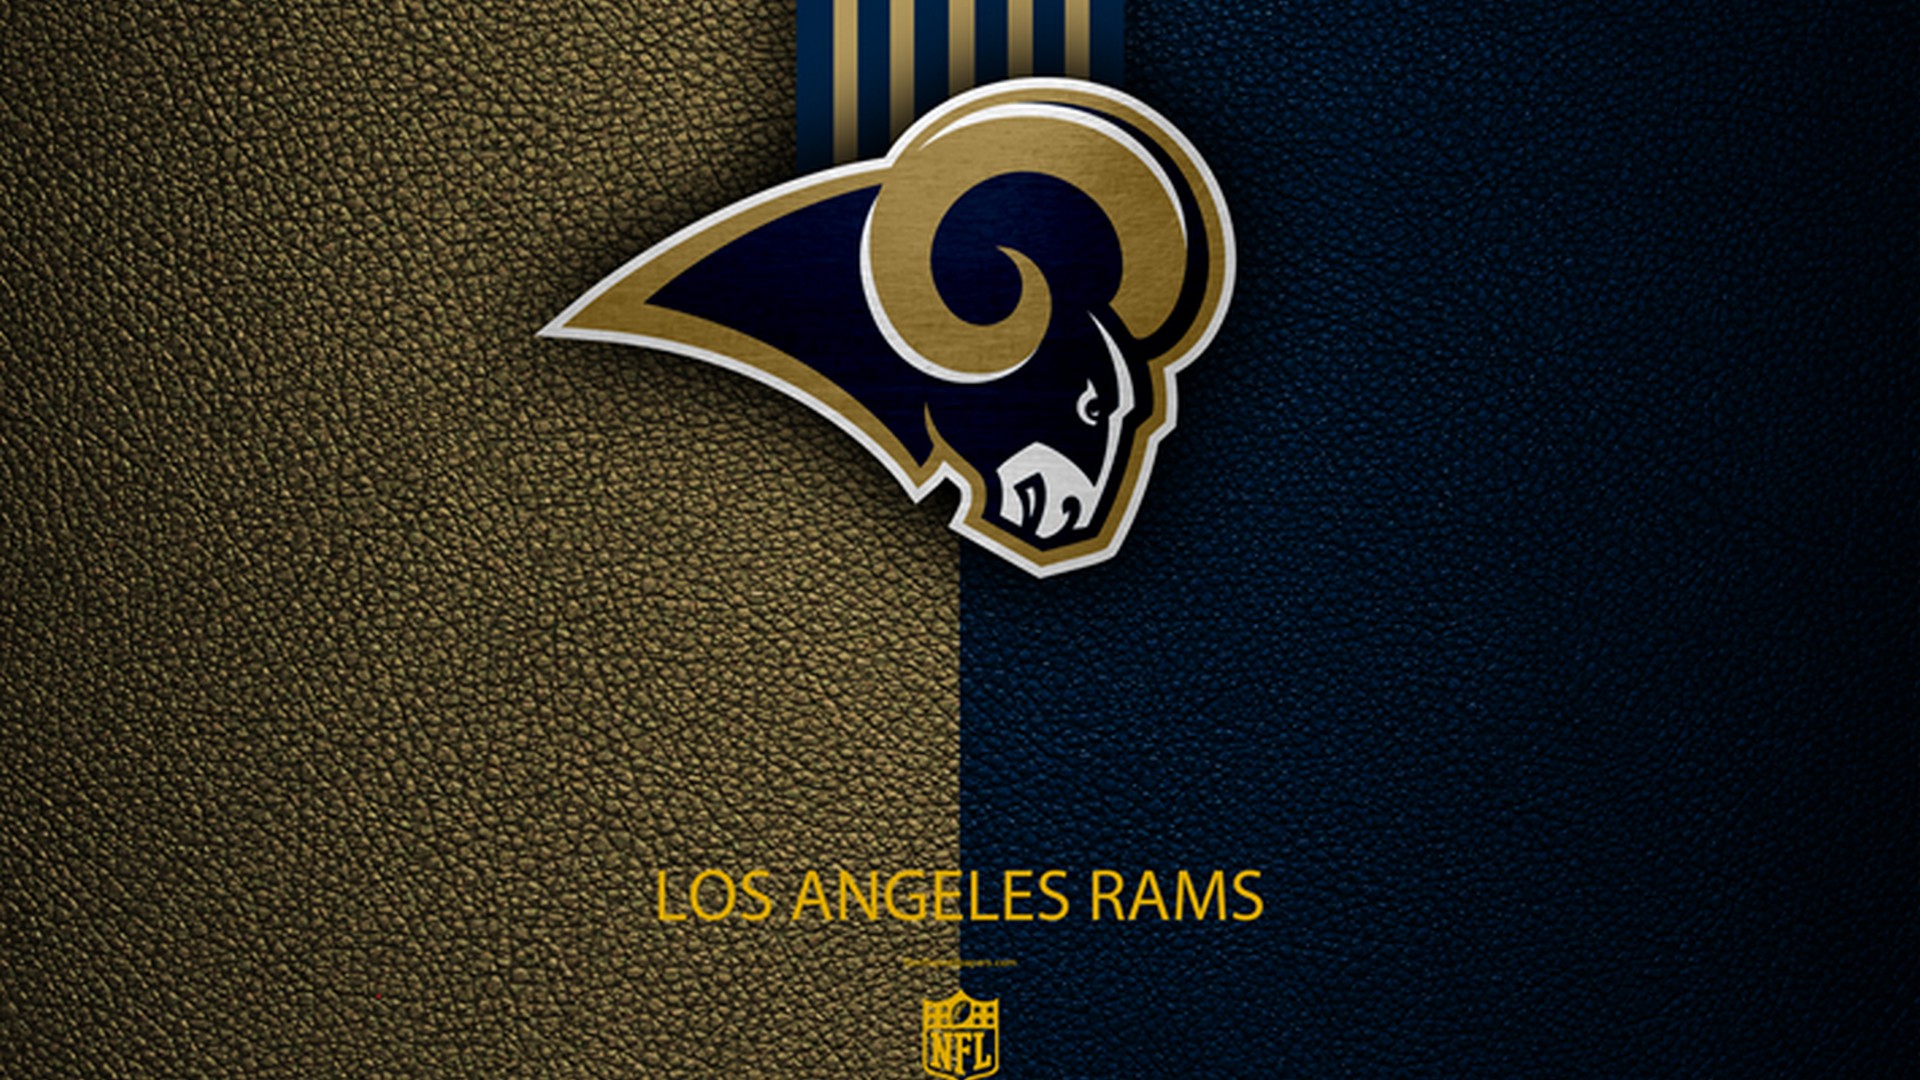 Wallpapers Los Angeles Rams With Resolution 1920X1080 pixel. You can make this wallpaper for your Mac or Windows Desktop Background, iPhone, Android or Tablet and another Smartphone device for free